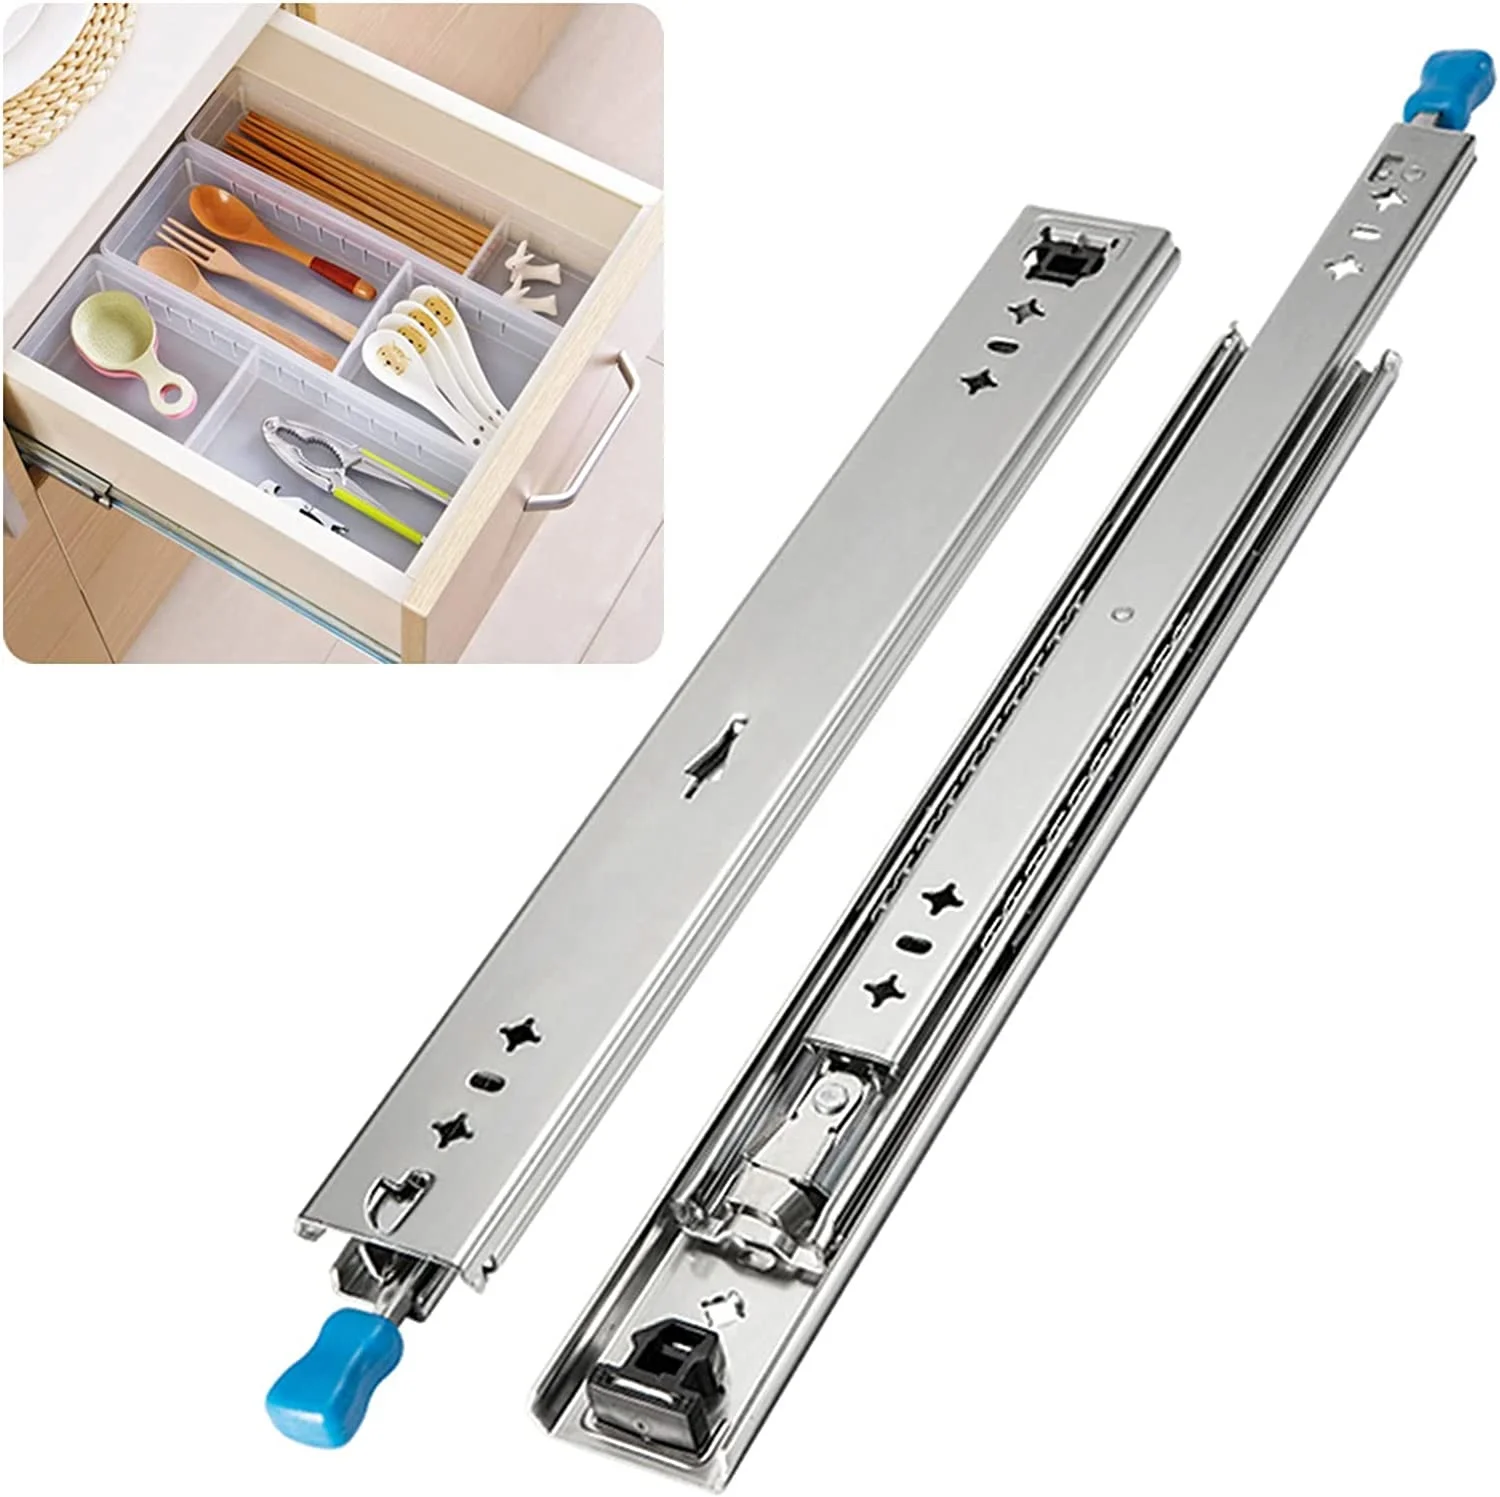 

Guanzhiyu 53mm wide 10-20 '' fully extended side mounted ball bearing slide rail high-performance load-bearing drawer kitchen